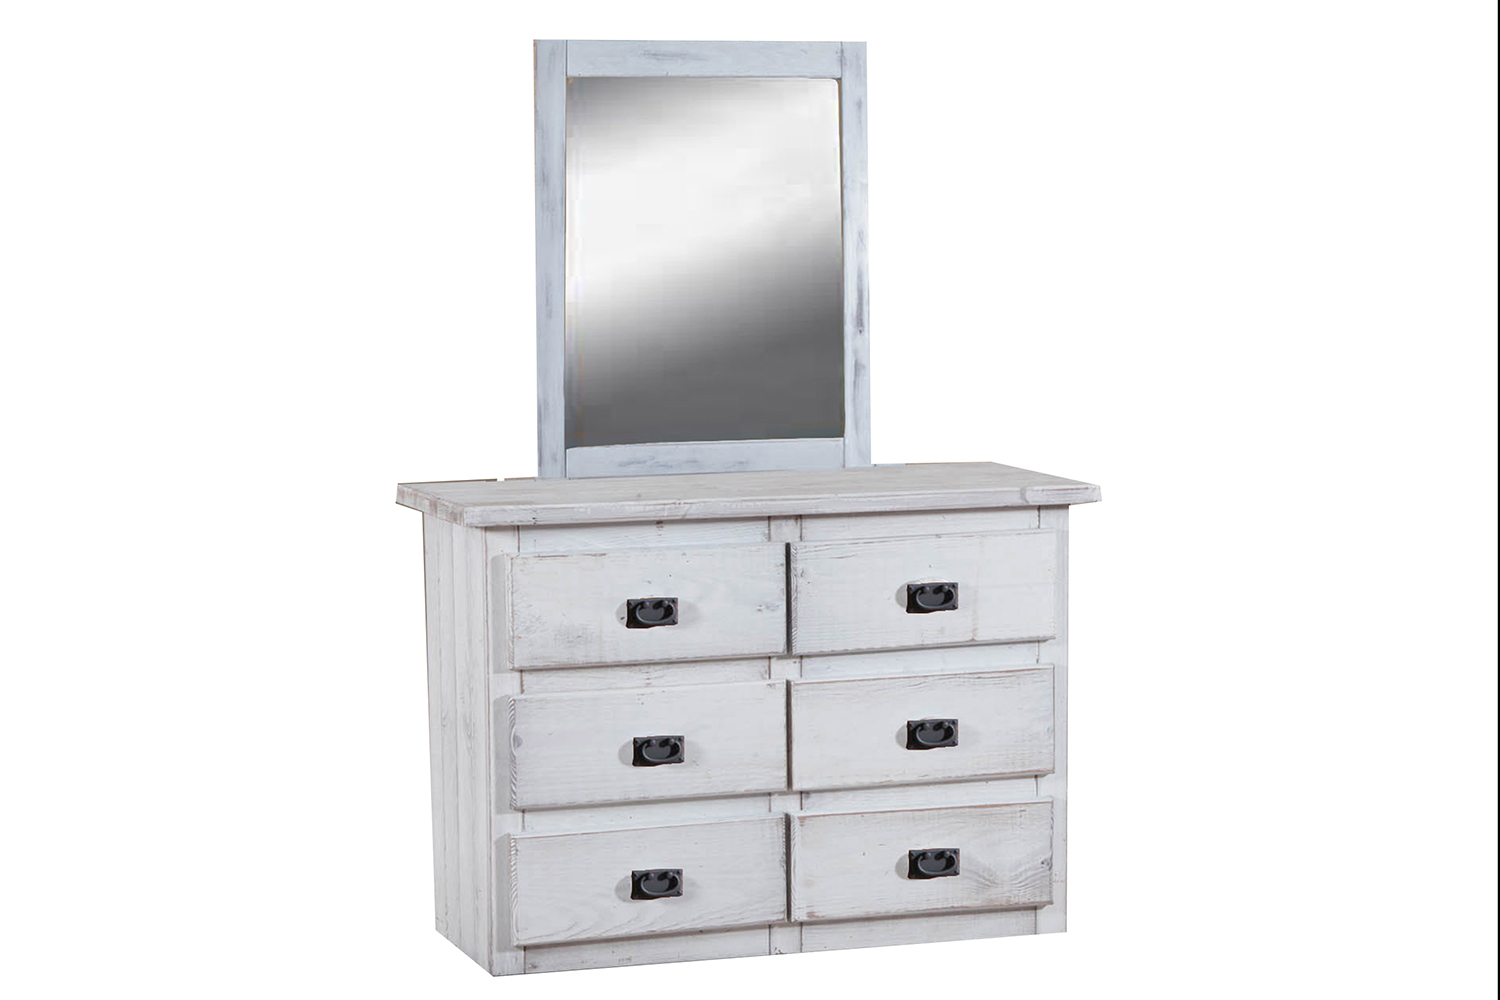 Chelsea Home 6 Drawer Mini Dresser with Mirror - White Distressed